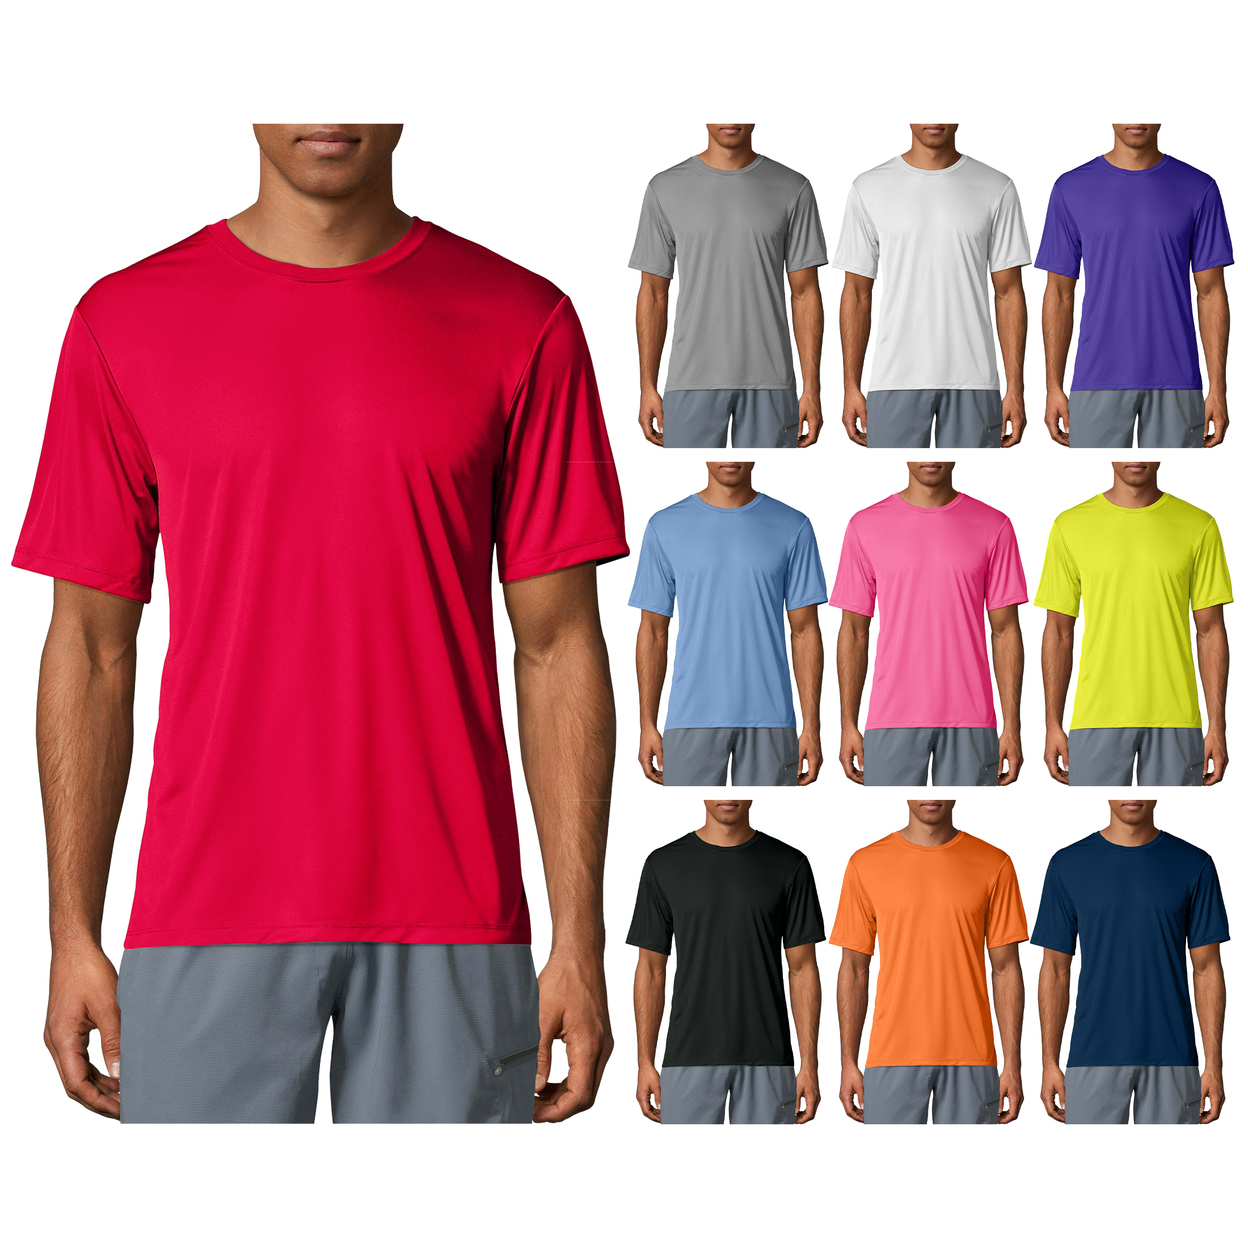 5-Pack: Men's Moisture Wicking Cool Dri-Fit Performance Short Sleeve Crew Neck T-Shirts - Large